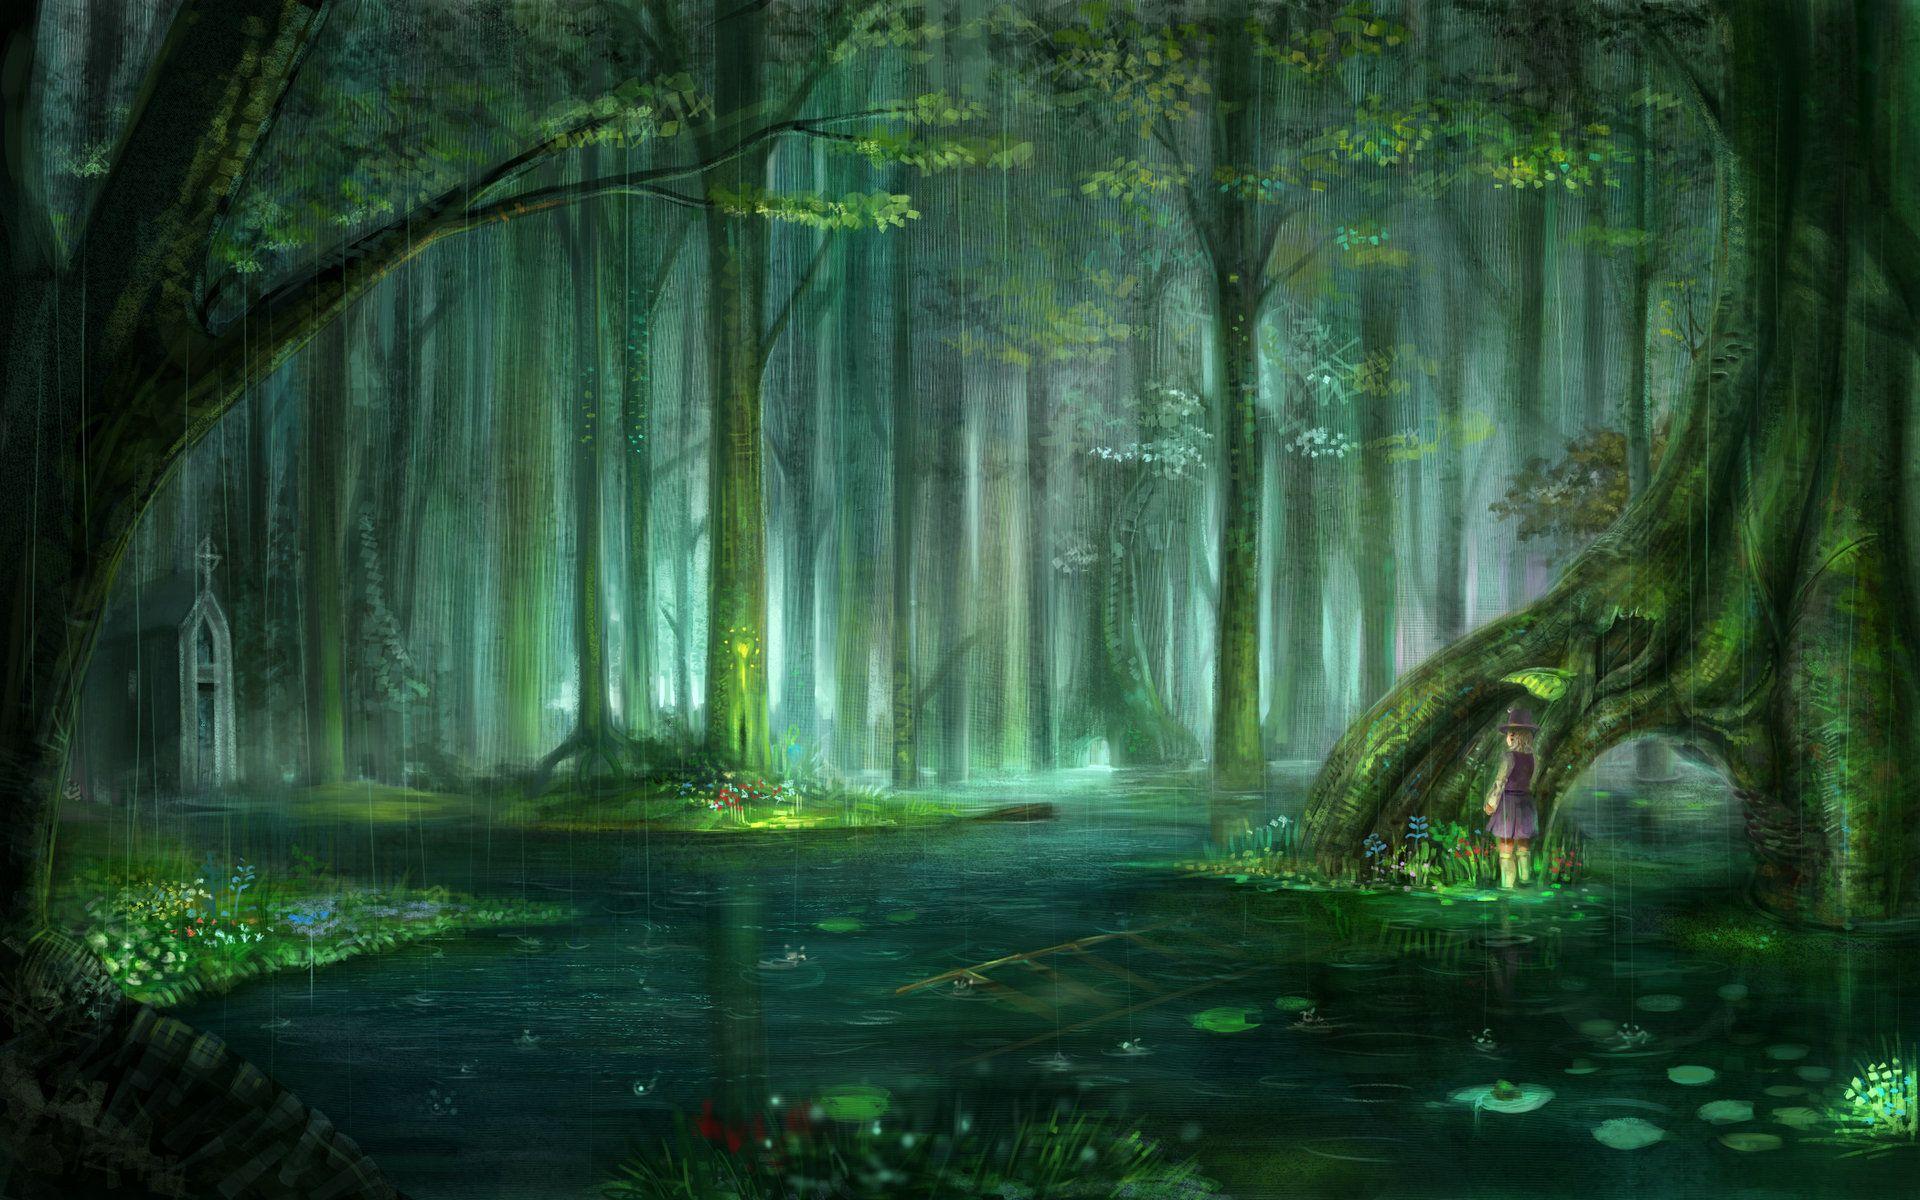 1100x619px Enchanted Forest (248.56 KB).07.2015